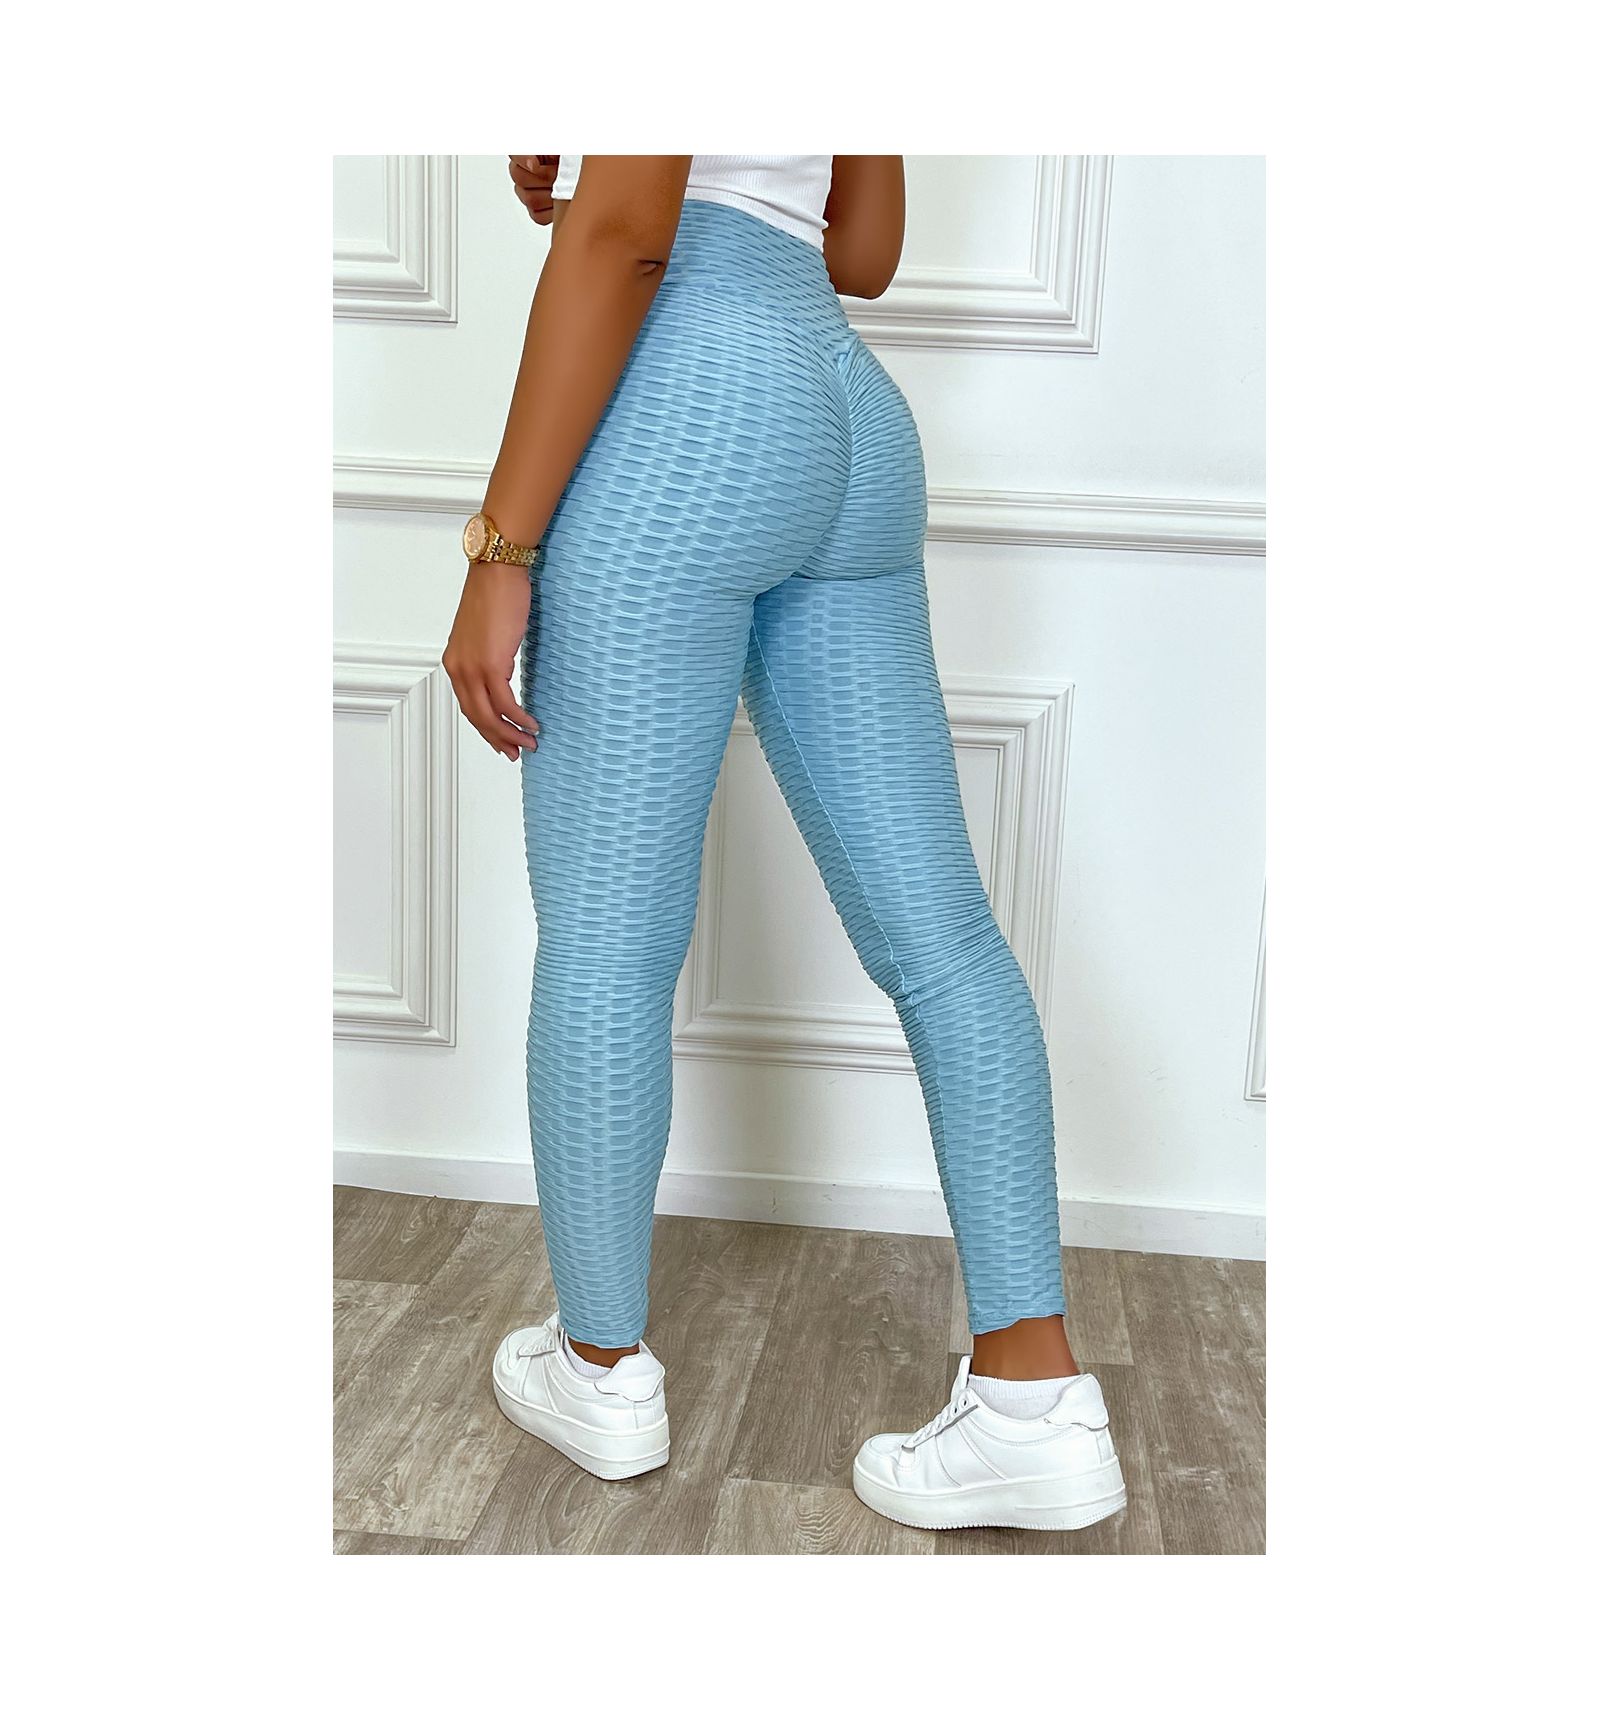 Leggings with modelling push-up effect, graduated compression and caffeine  + vitamin E